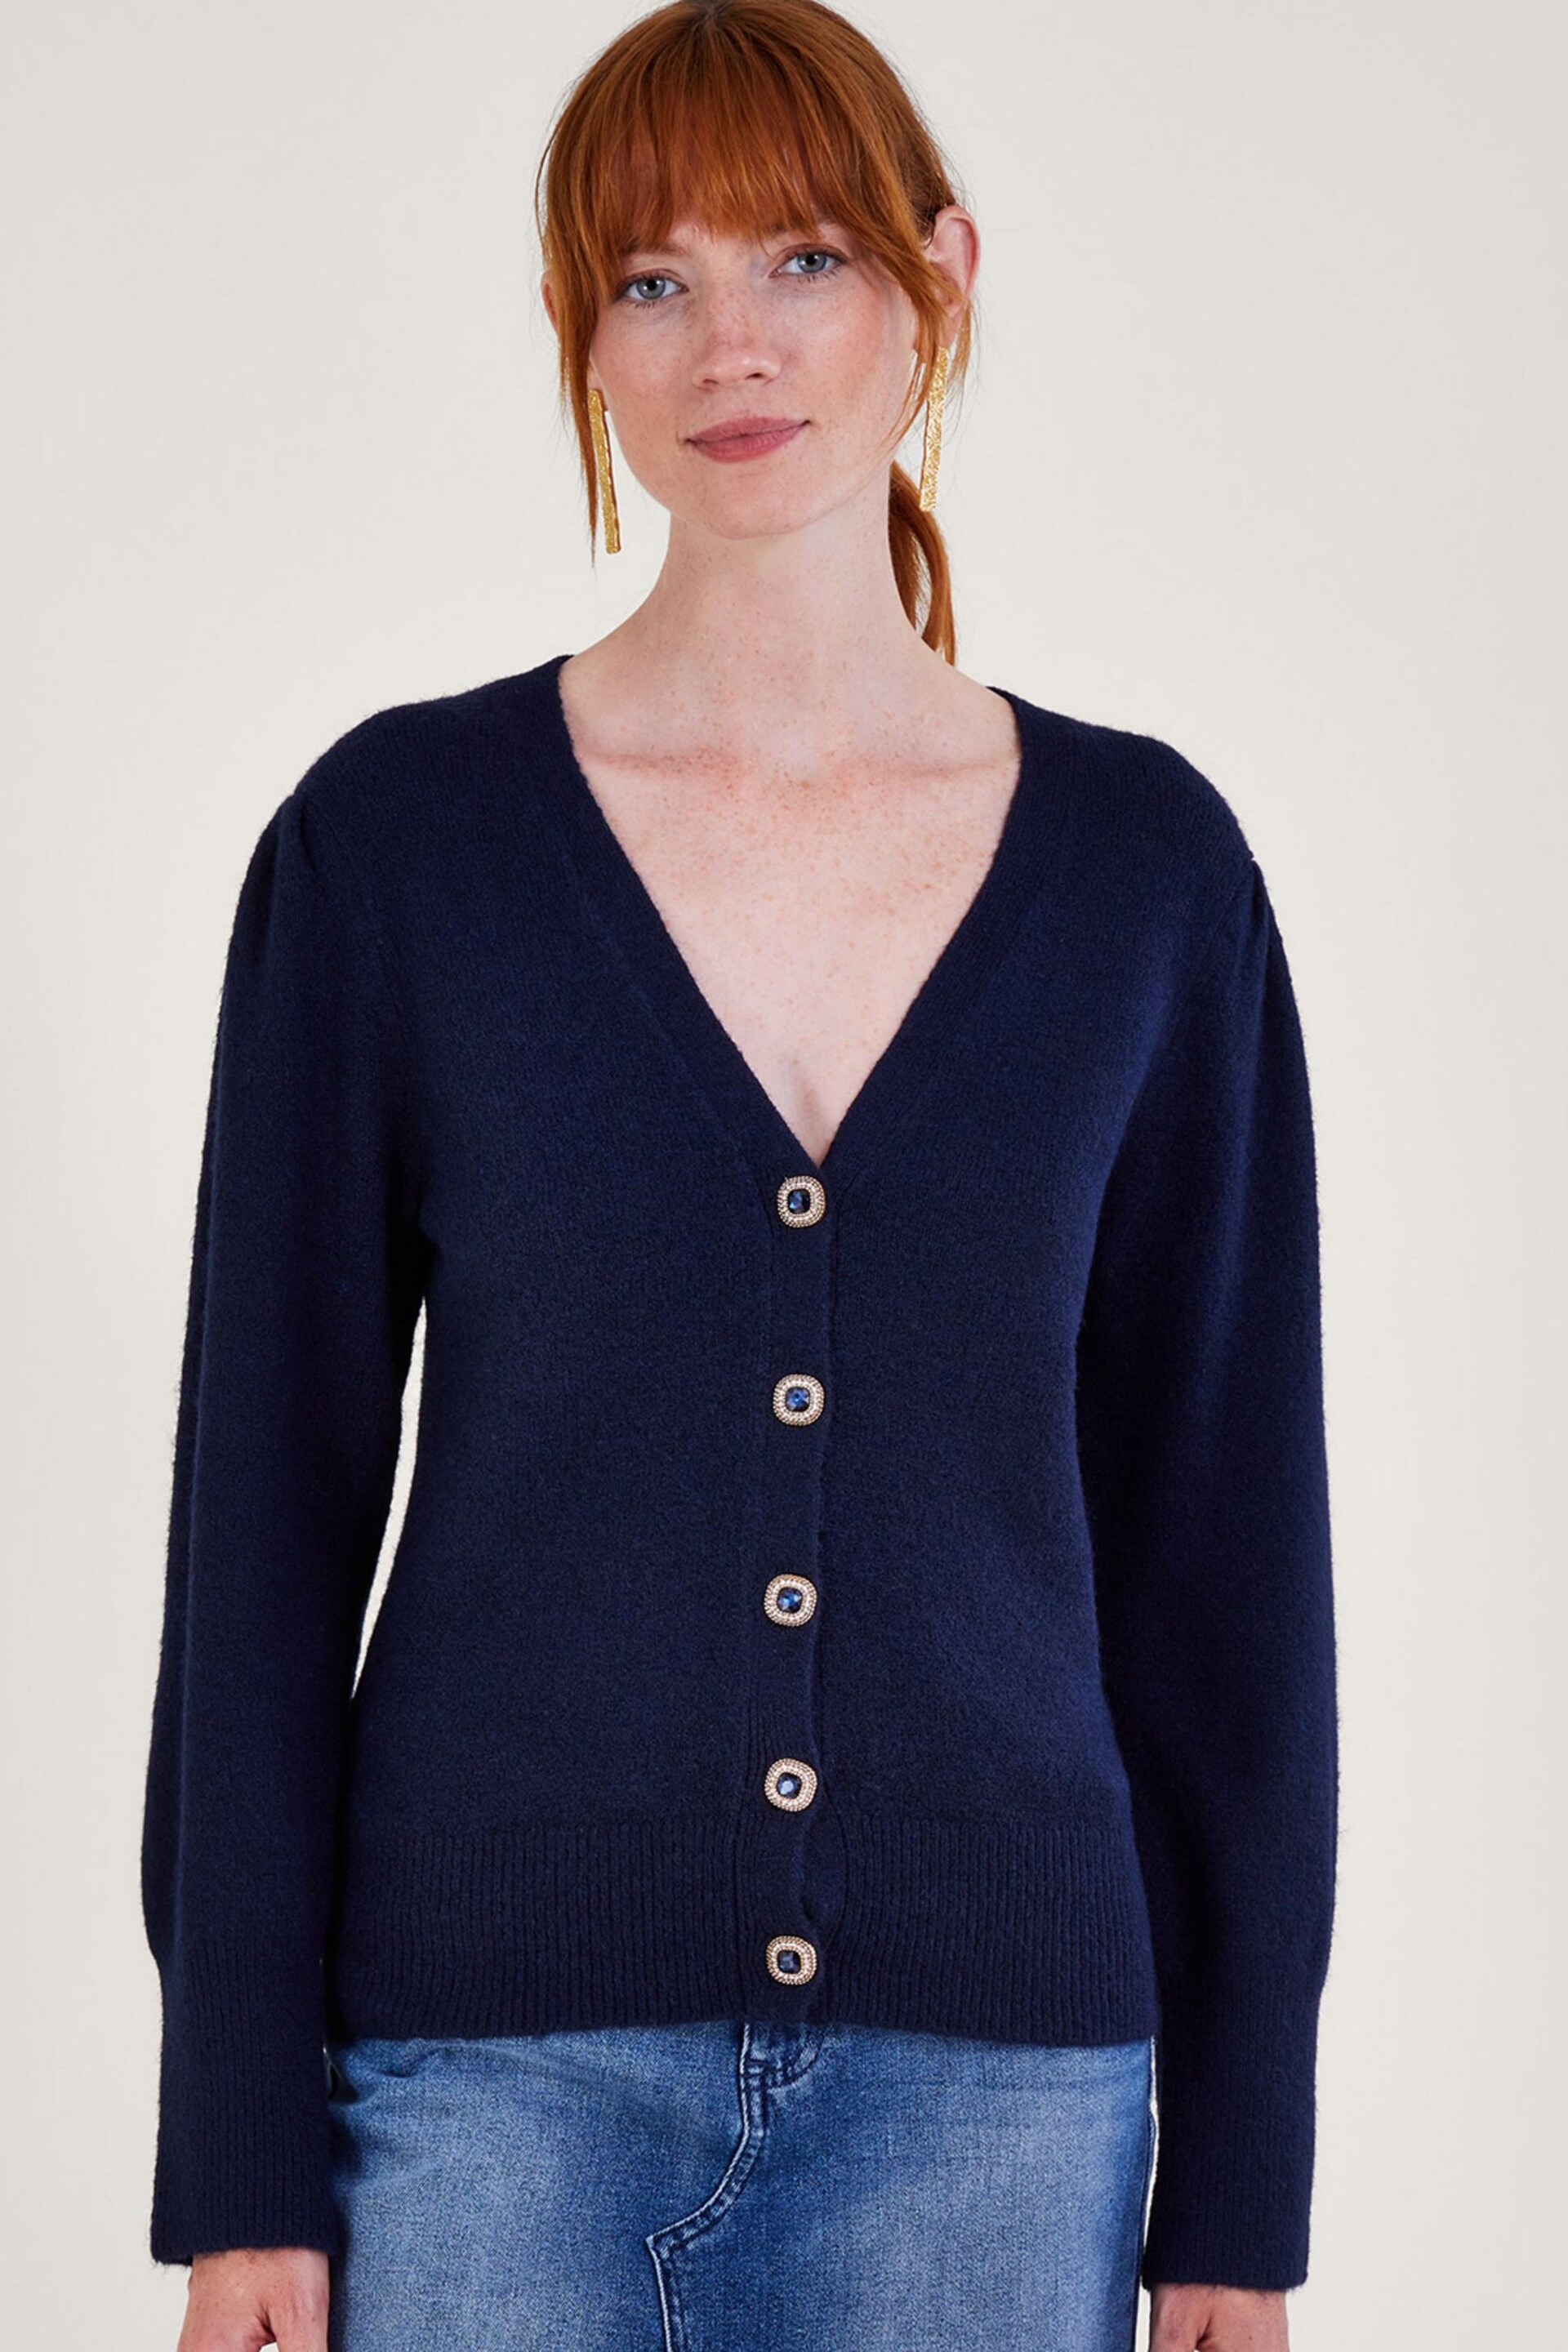 Monsoon Blue Bree Button Jacket - Image 1 of 4